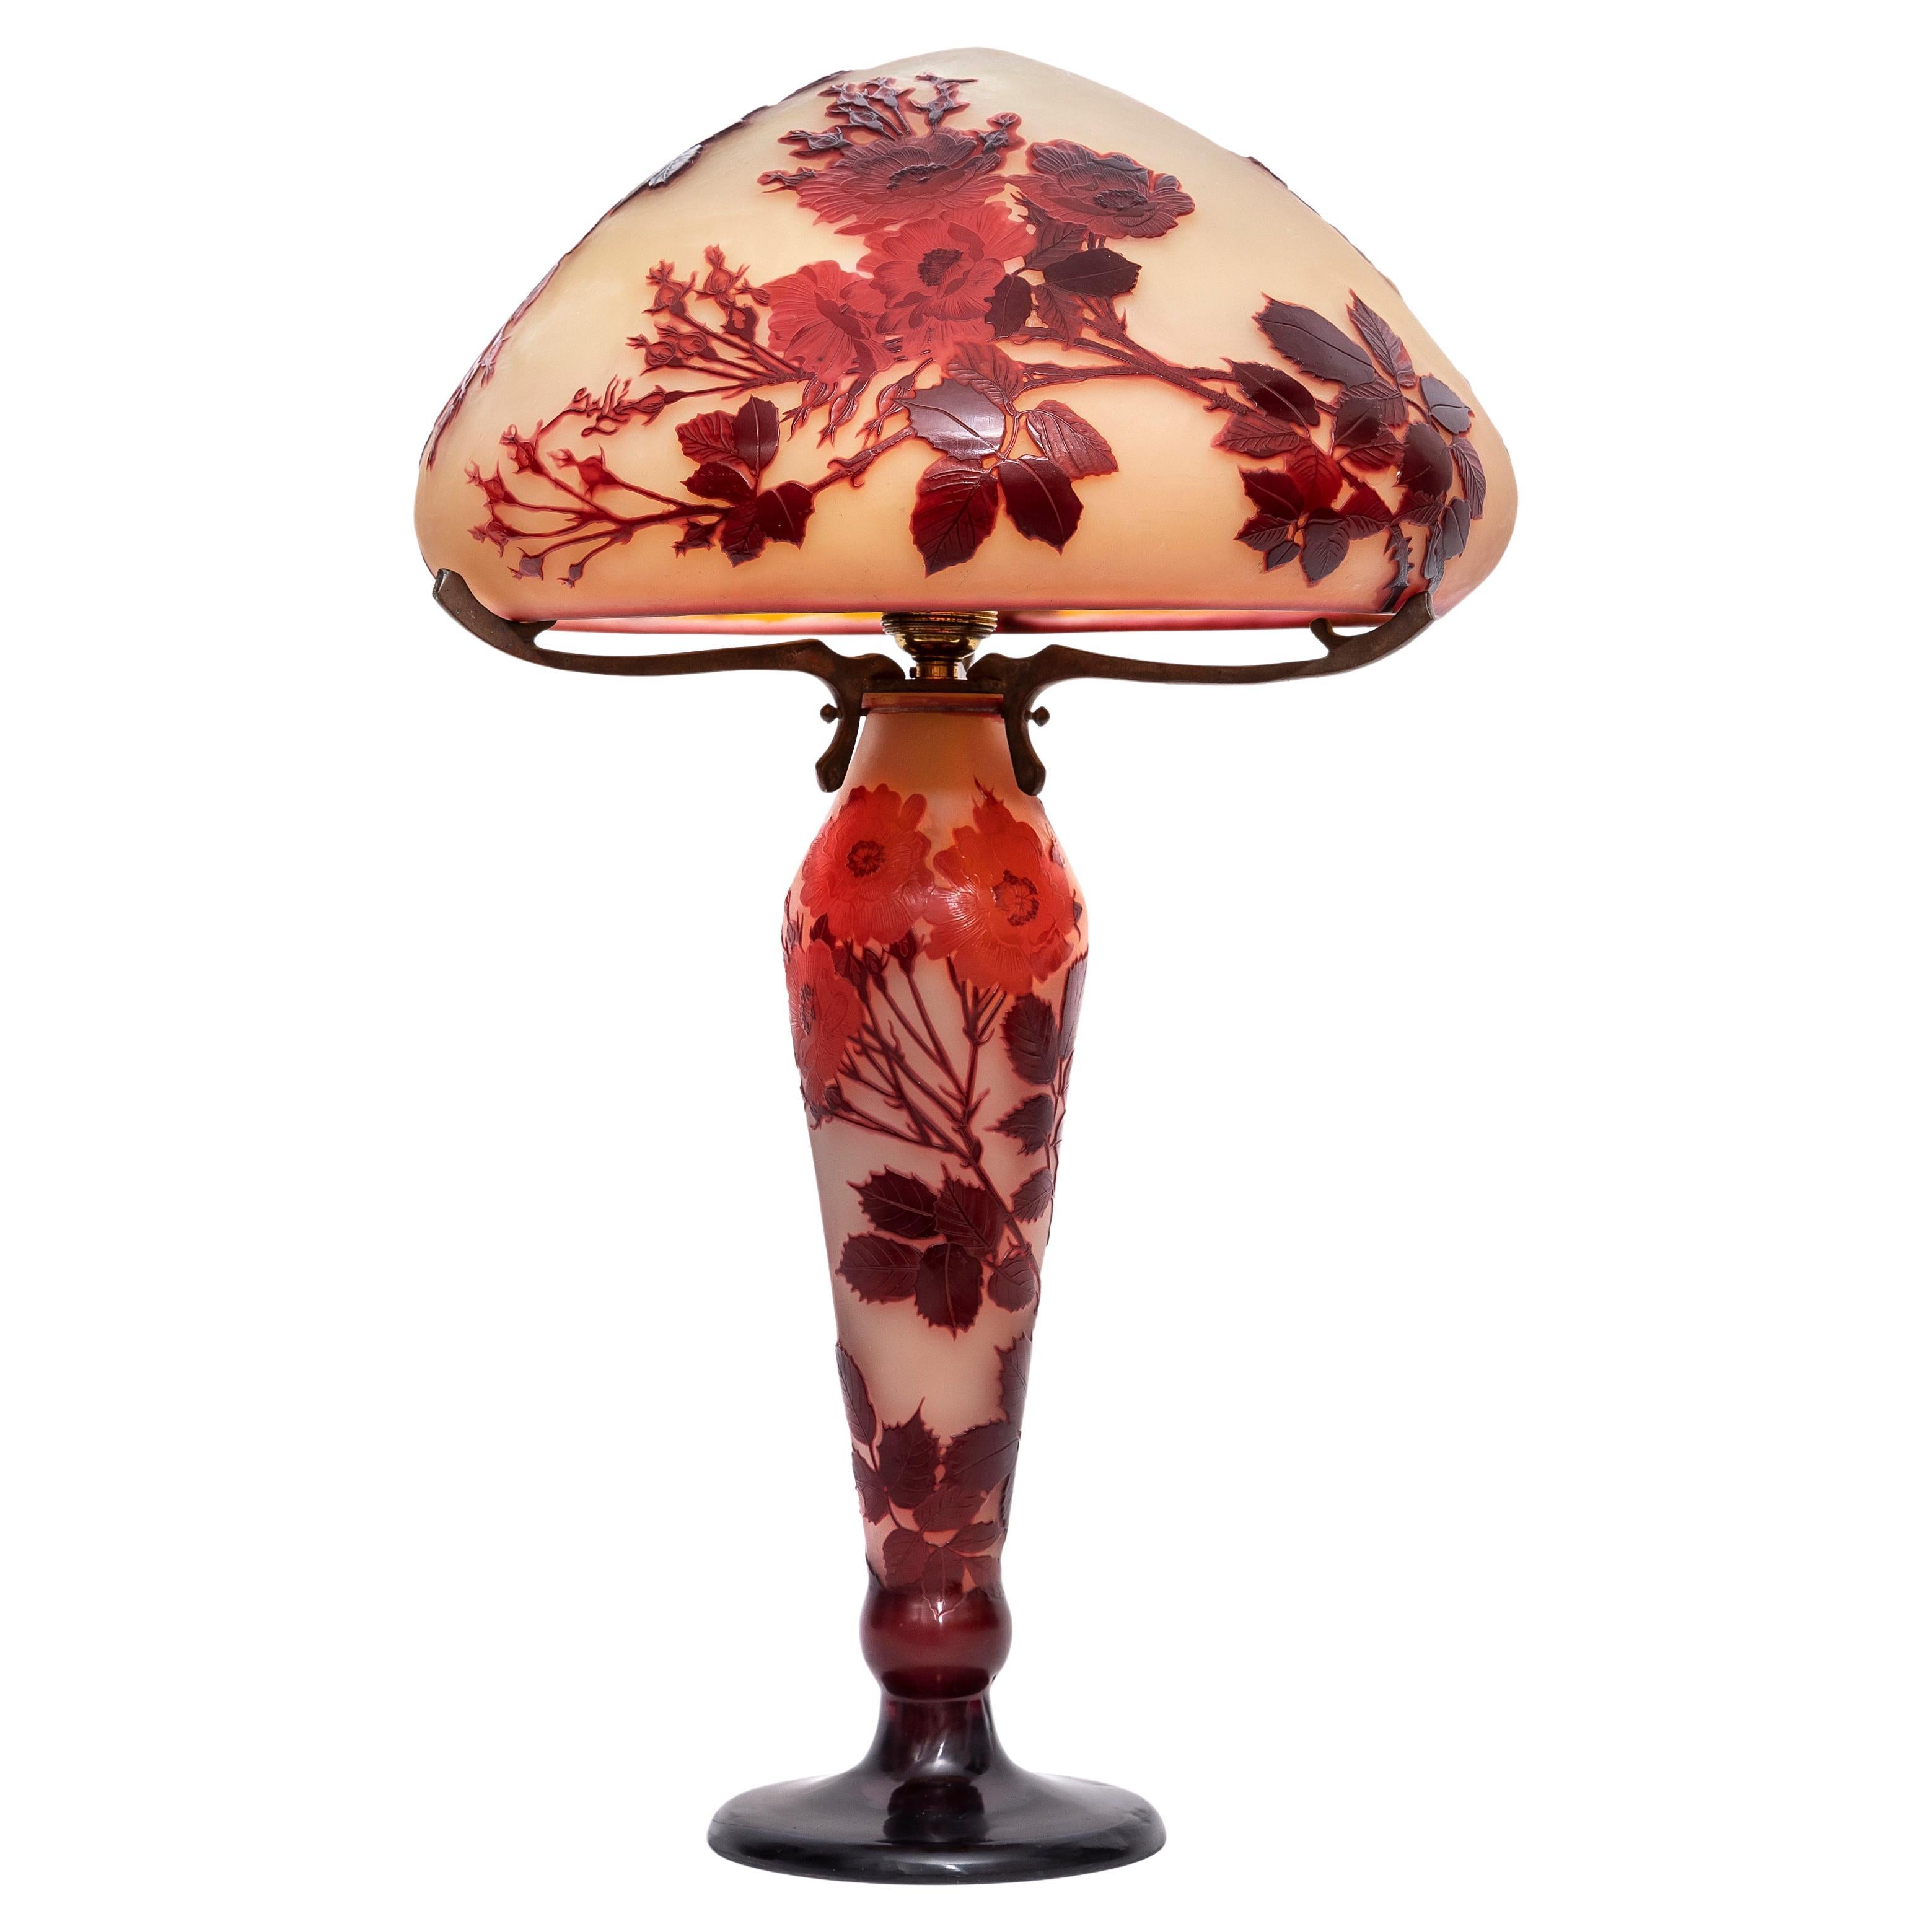 French Art Nouveau Lamp by Emile Galle Cameo Cut Glass in Red Sunset Colors For Sale